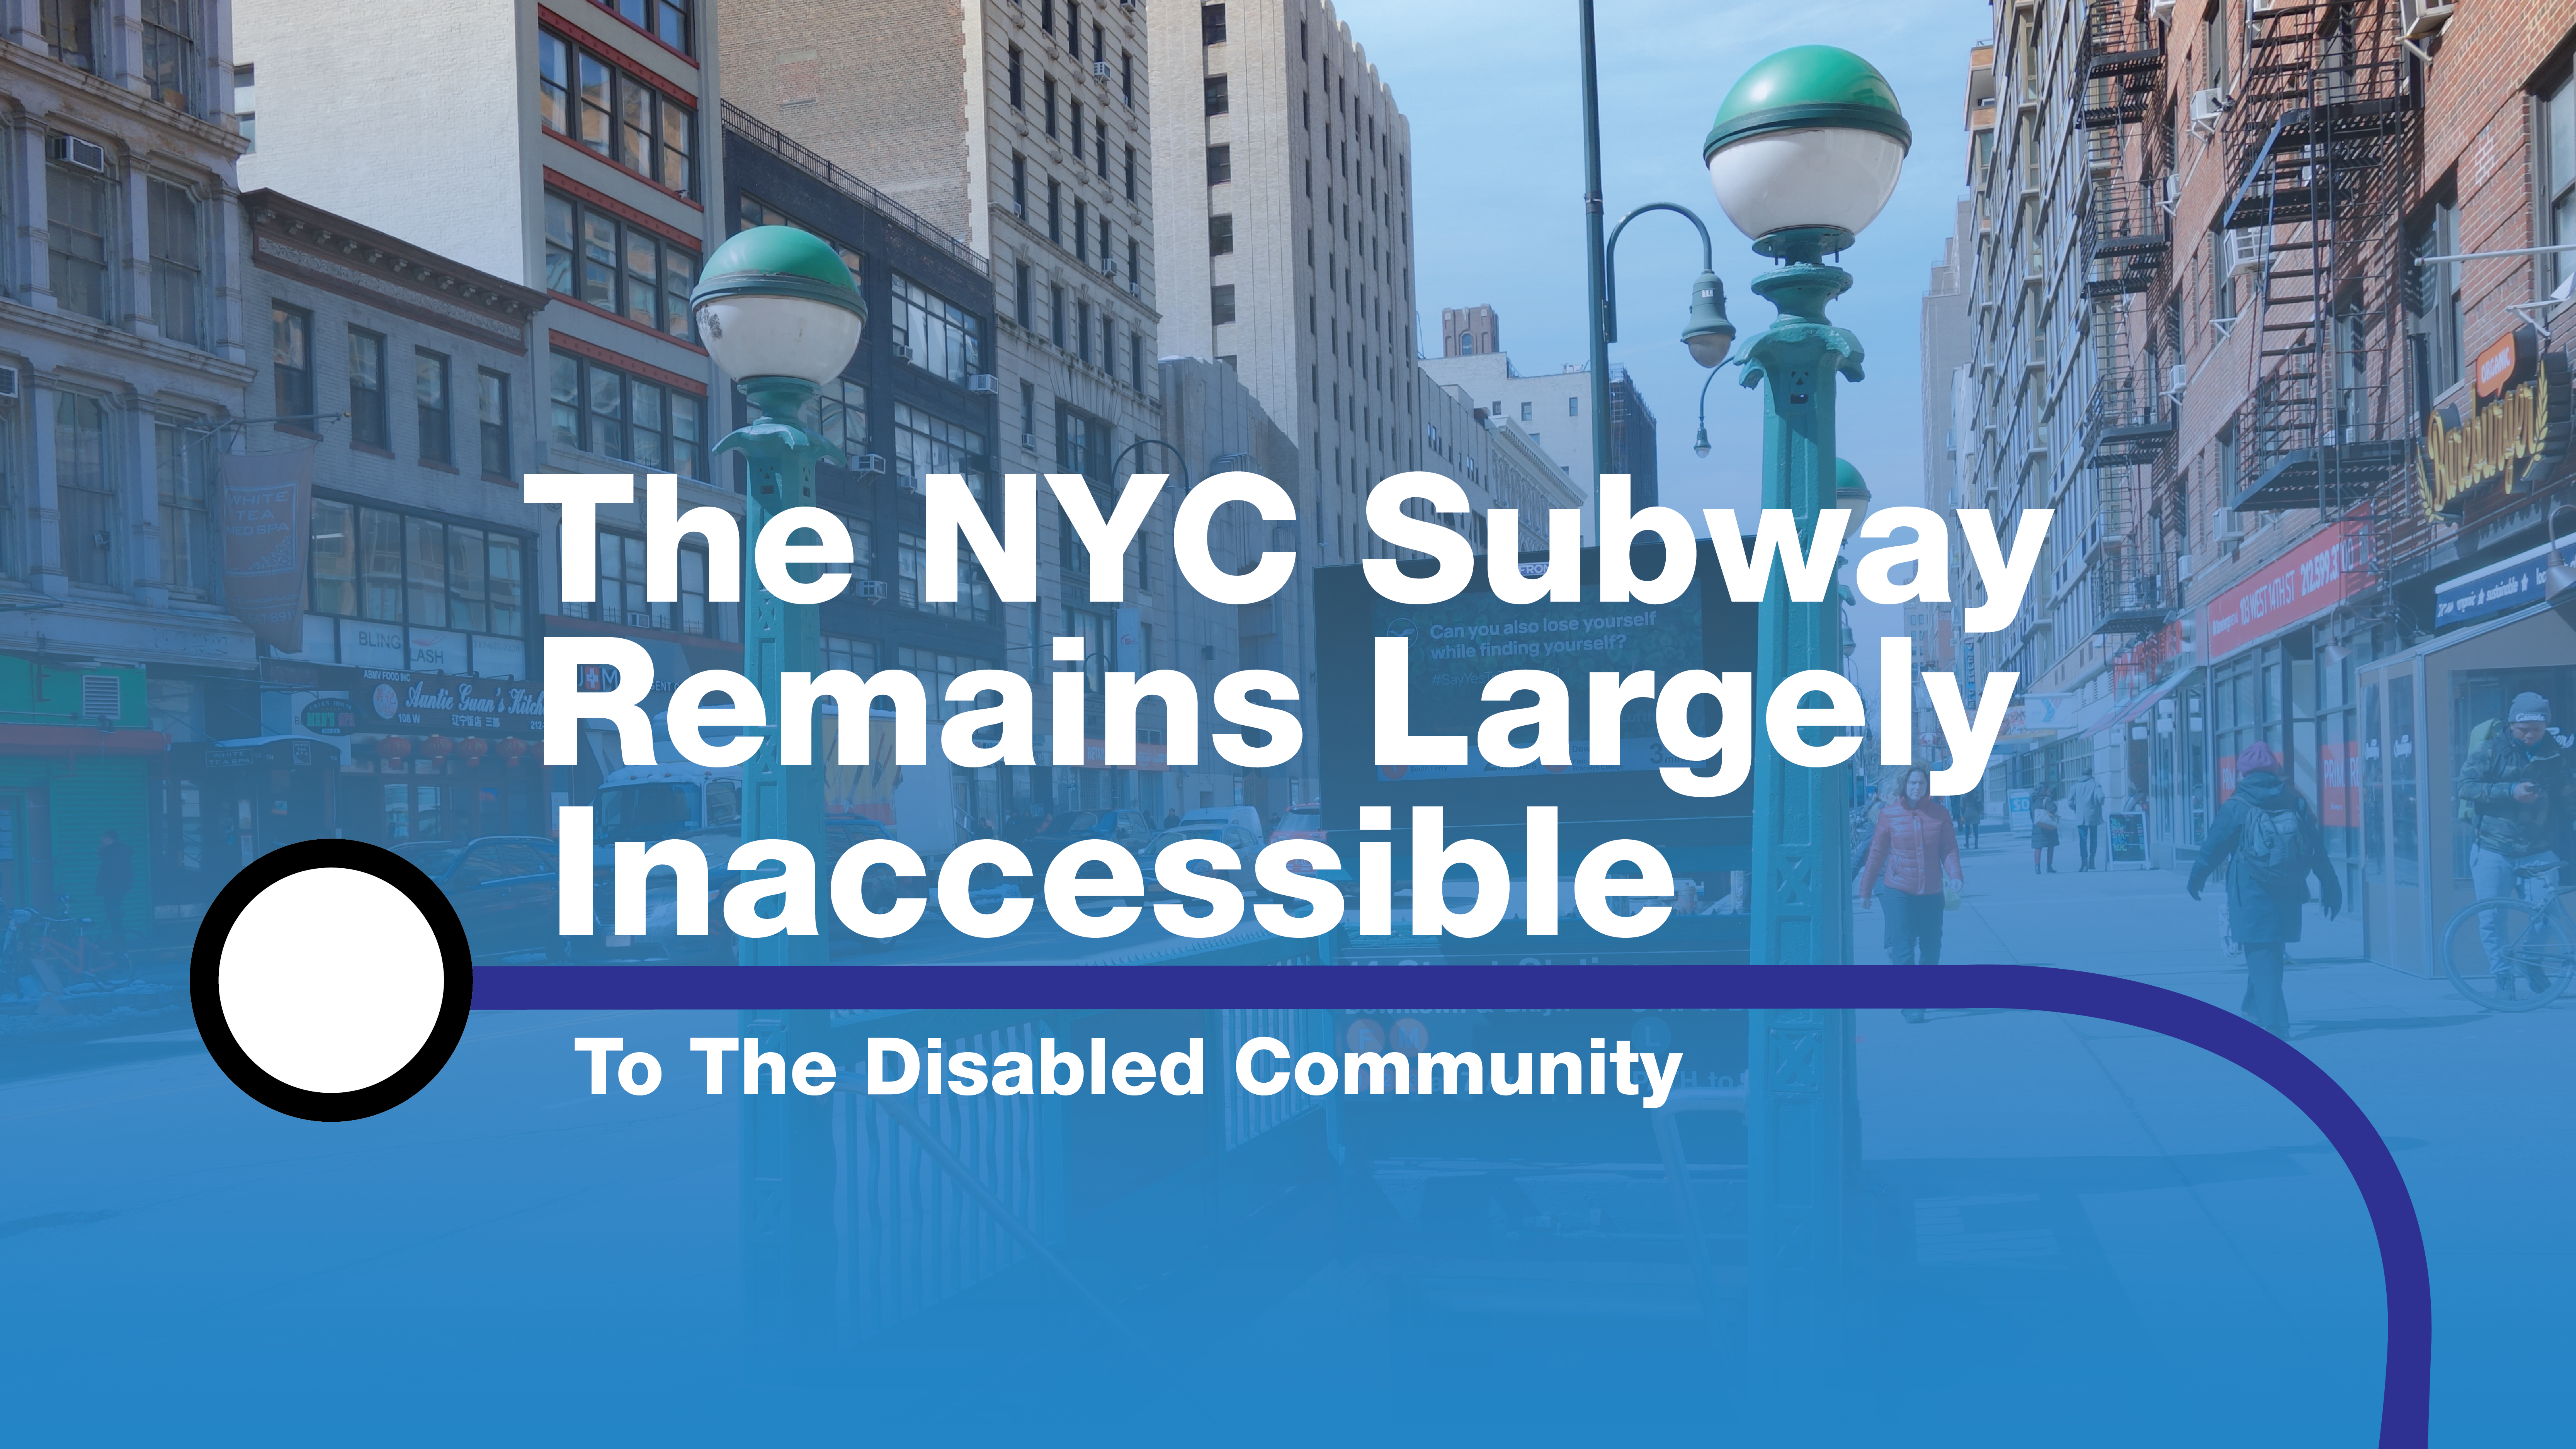 photo of NYC subway entrance with words "The NYC Subway Remains Largely Inaccessible to the Disabled Community"